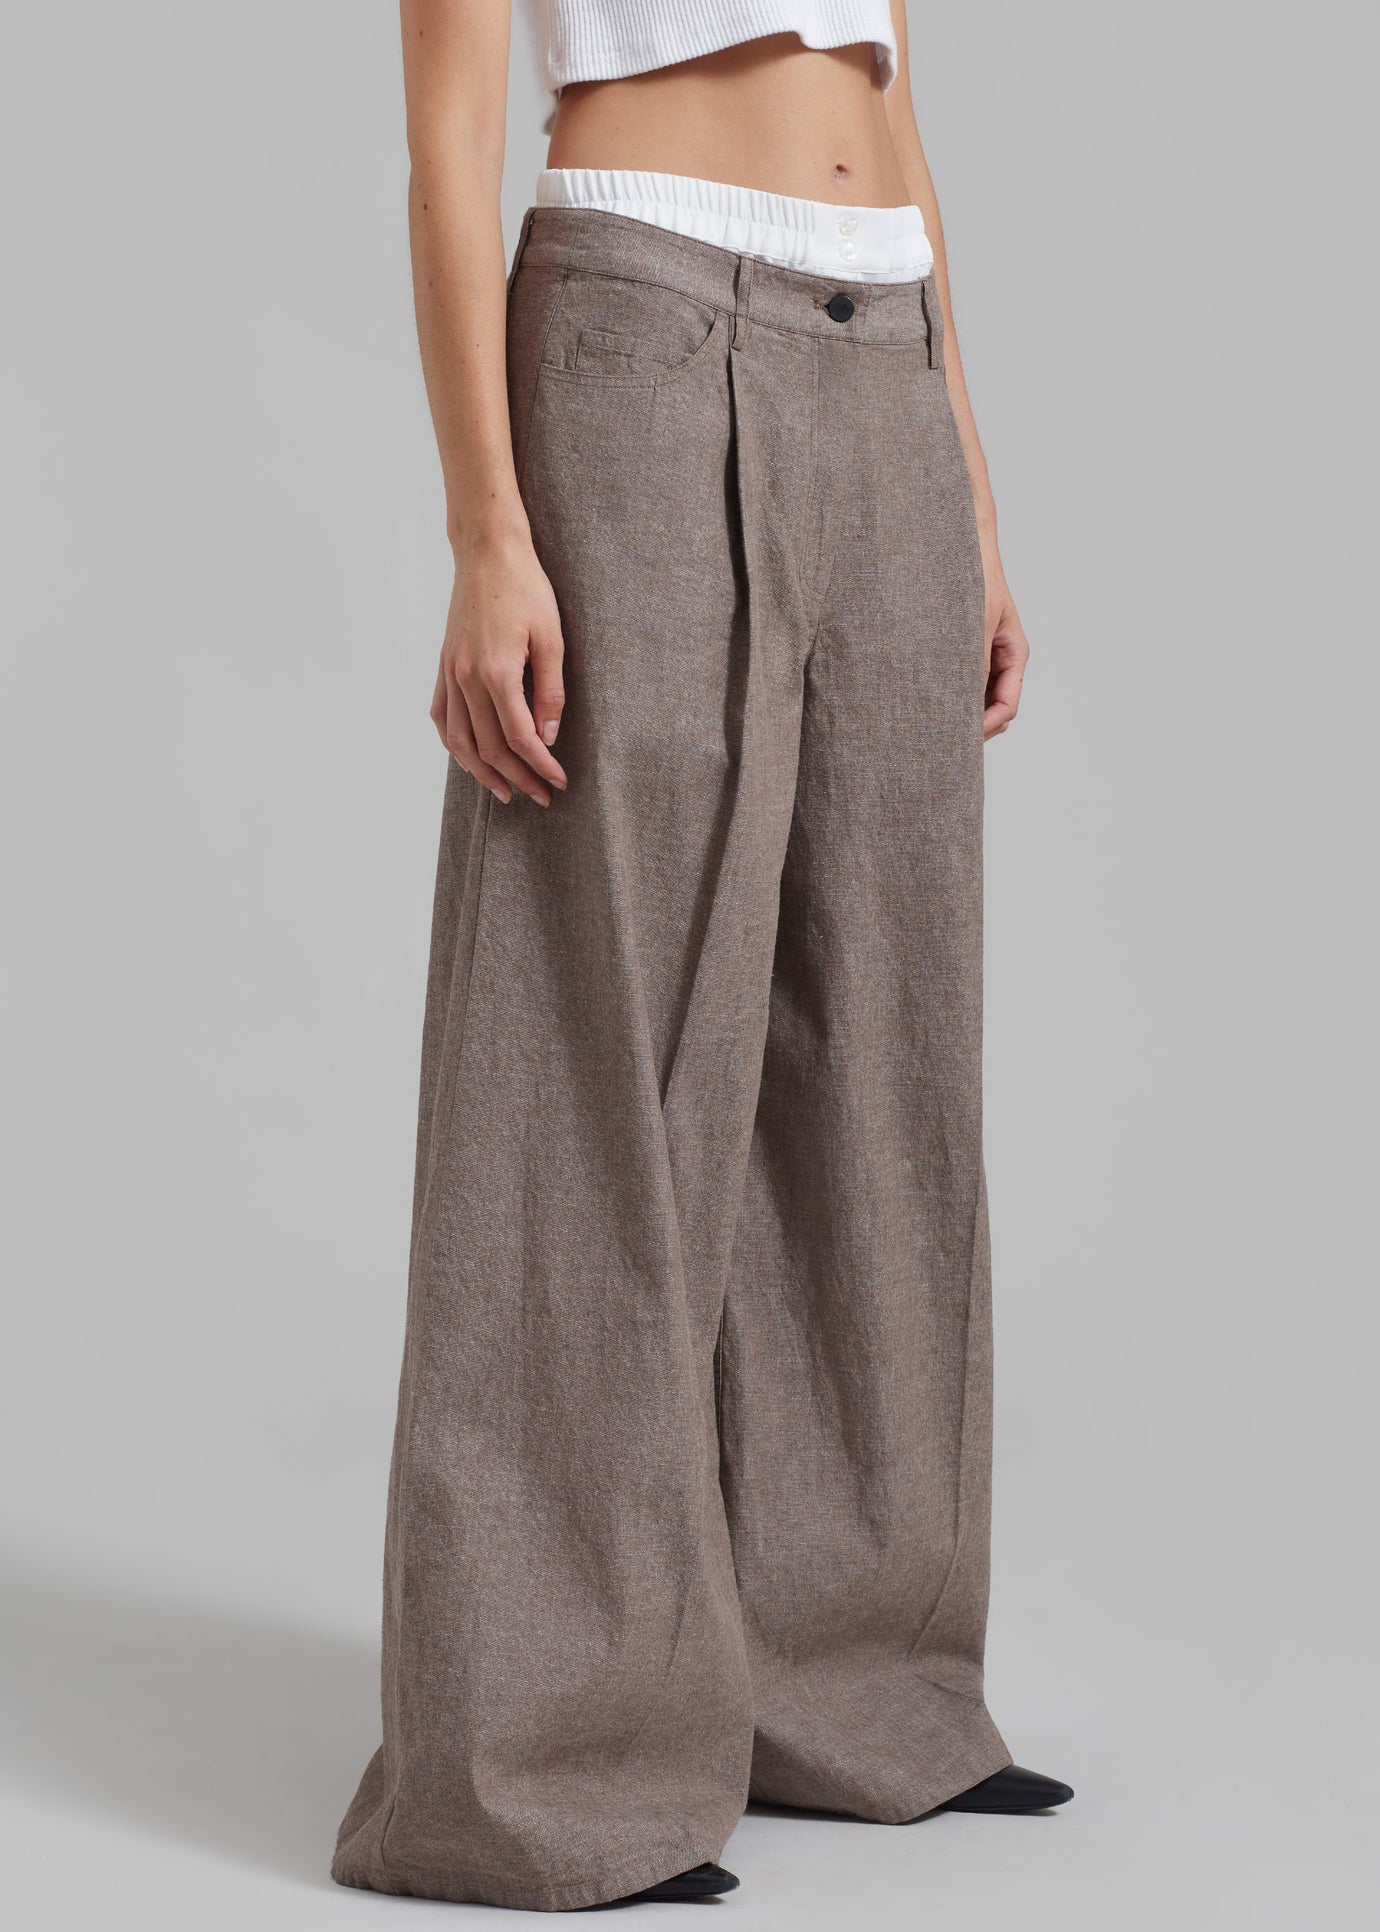 REMAIN Textured Wide Pants - Deep Taupe